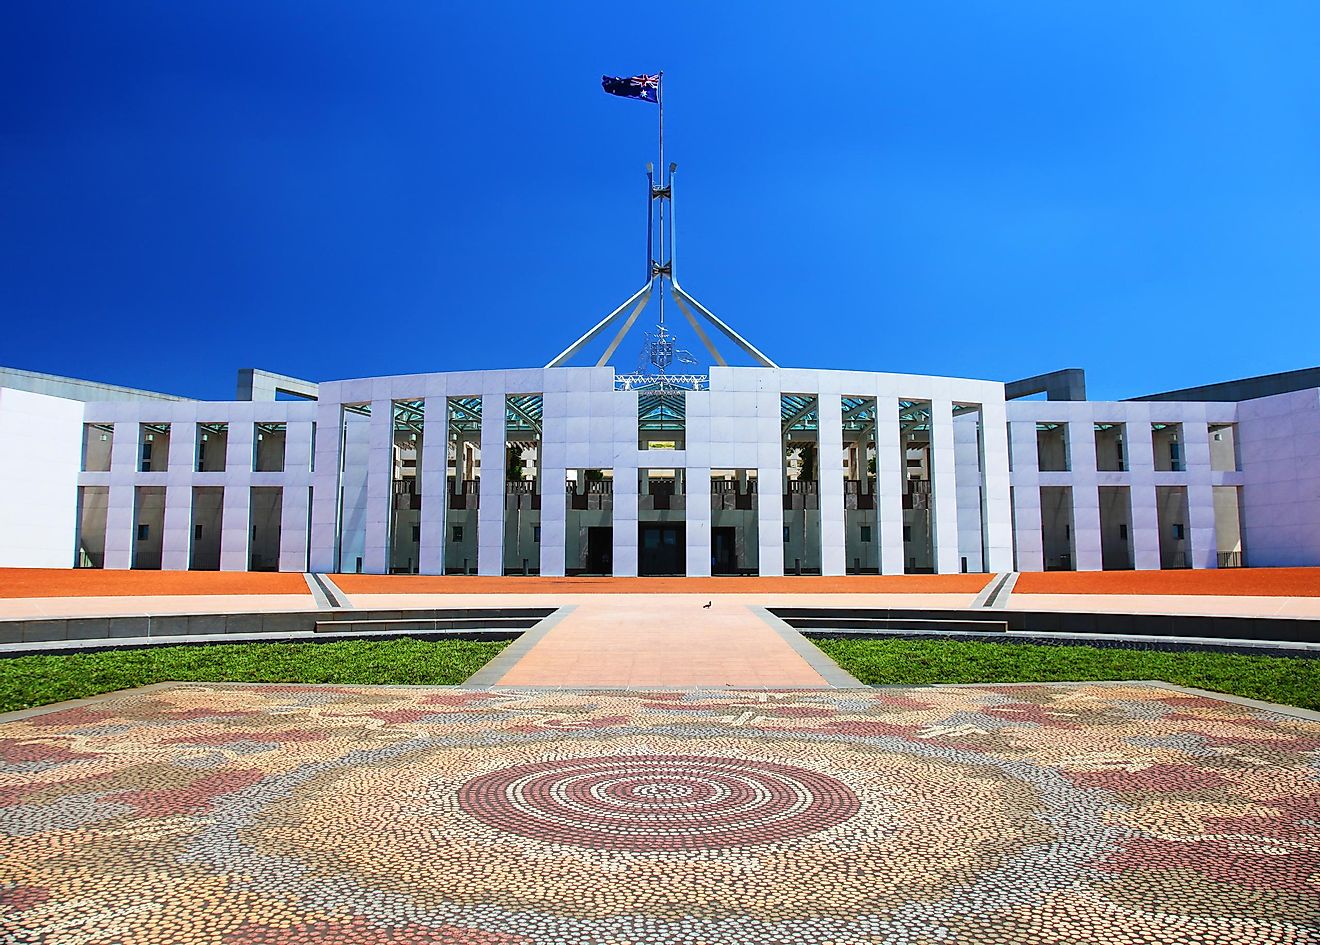 The location of this grand building is in Australia's capital - Canberra.